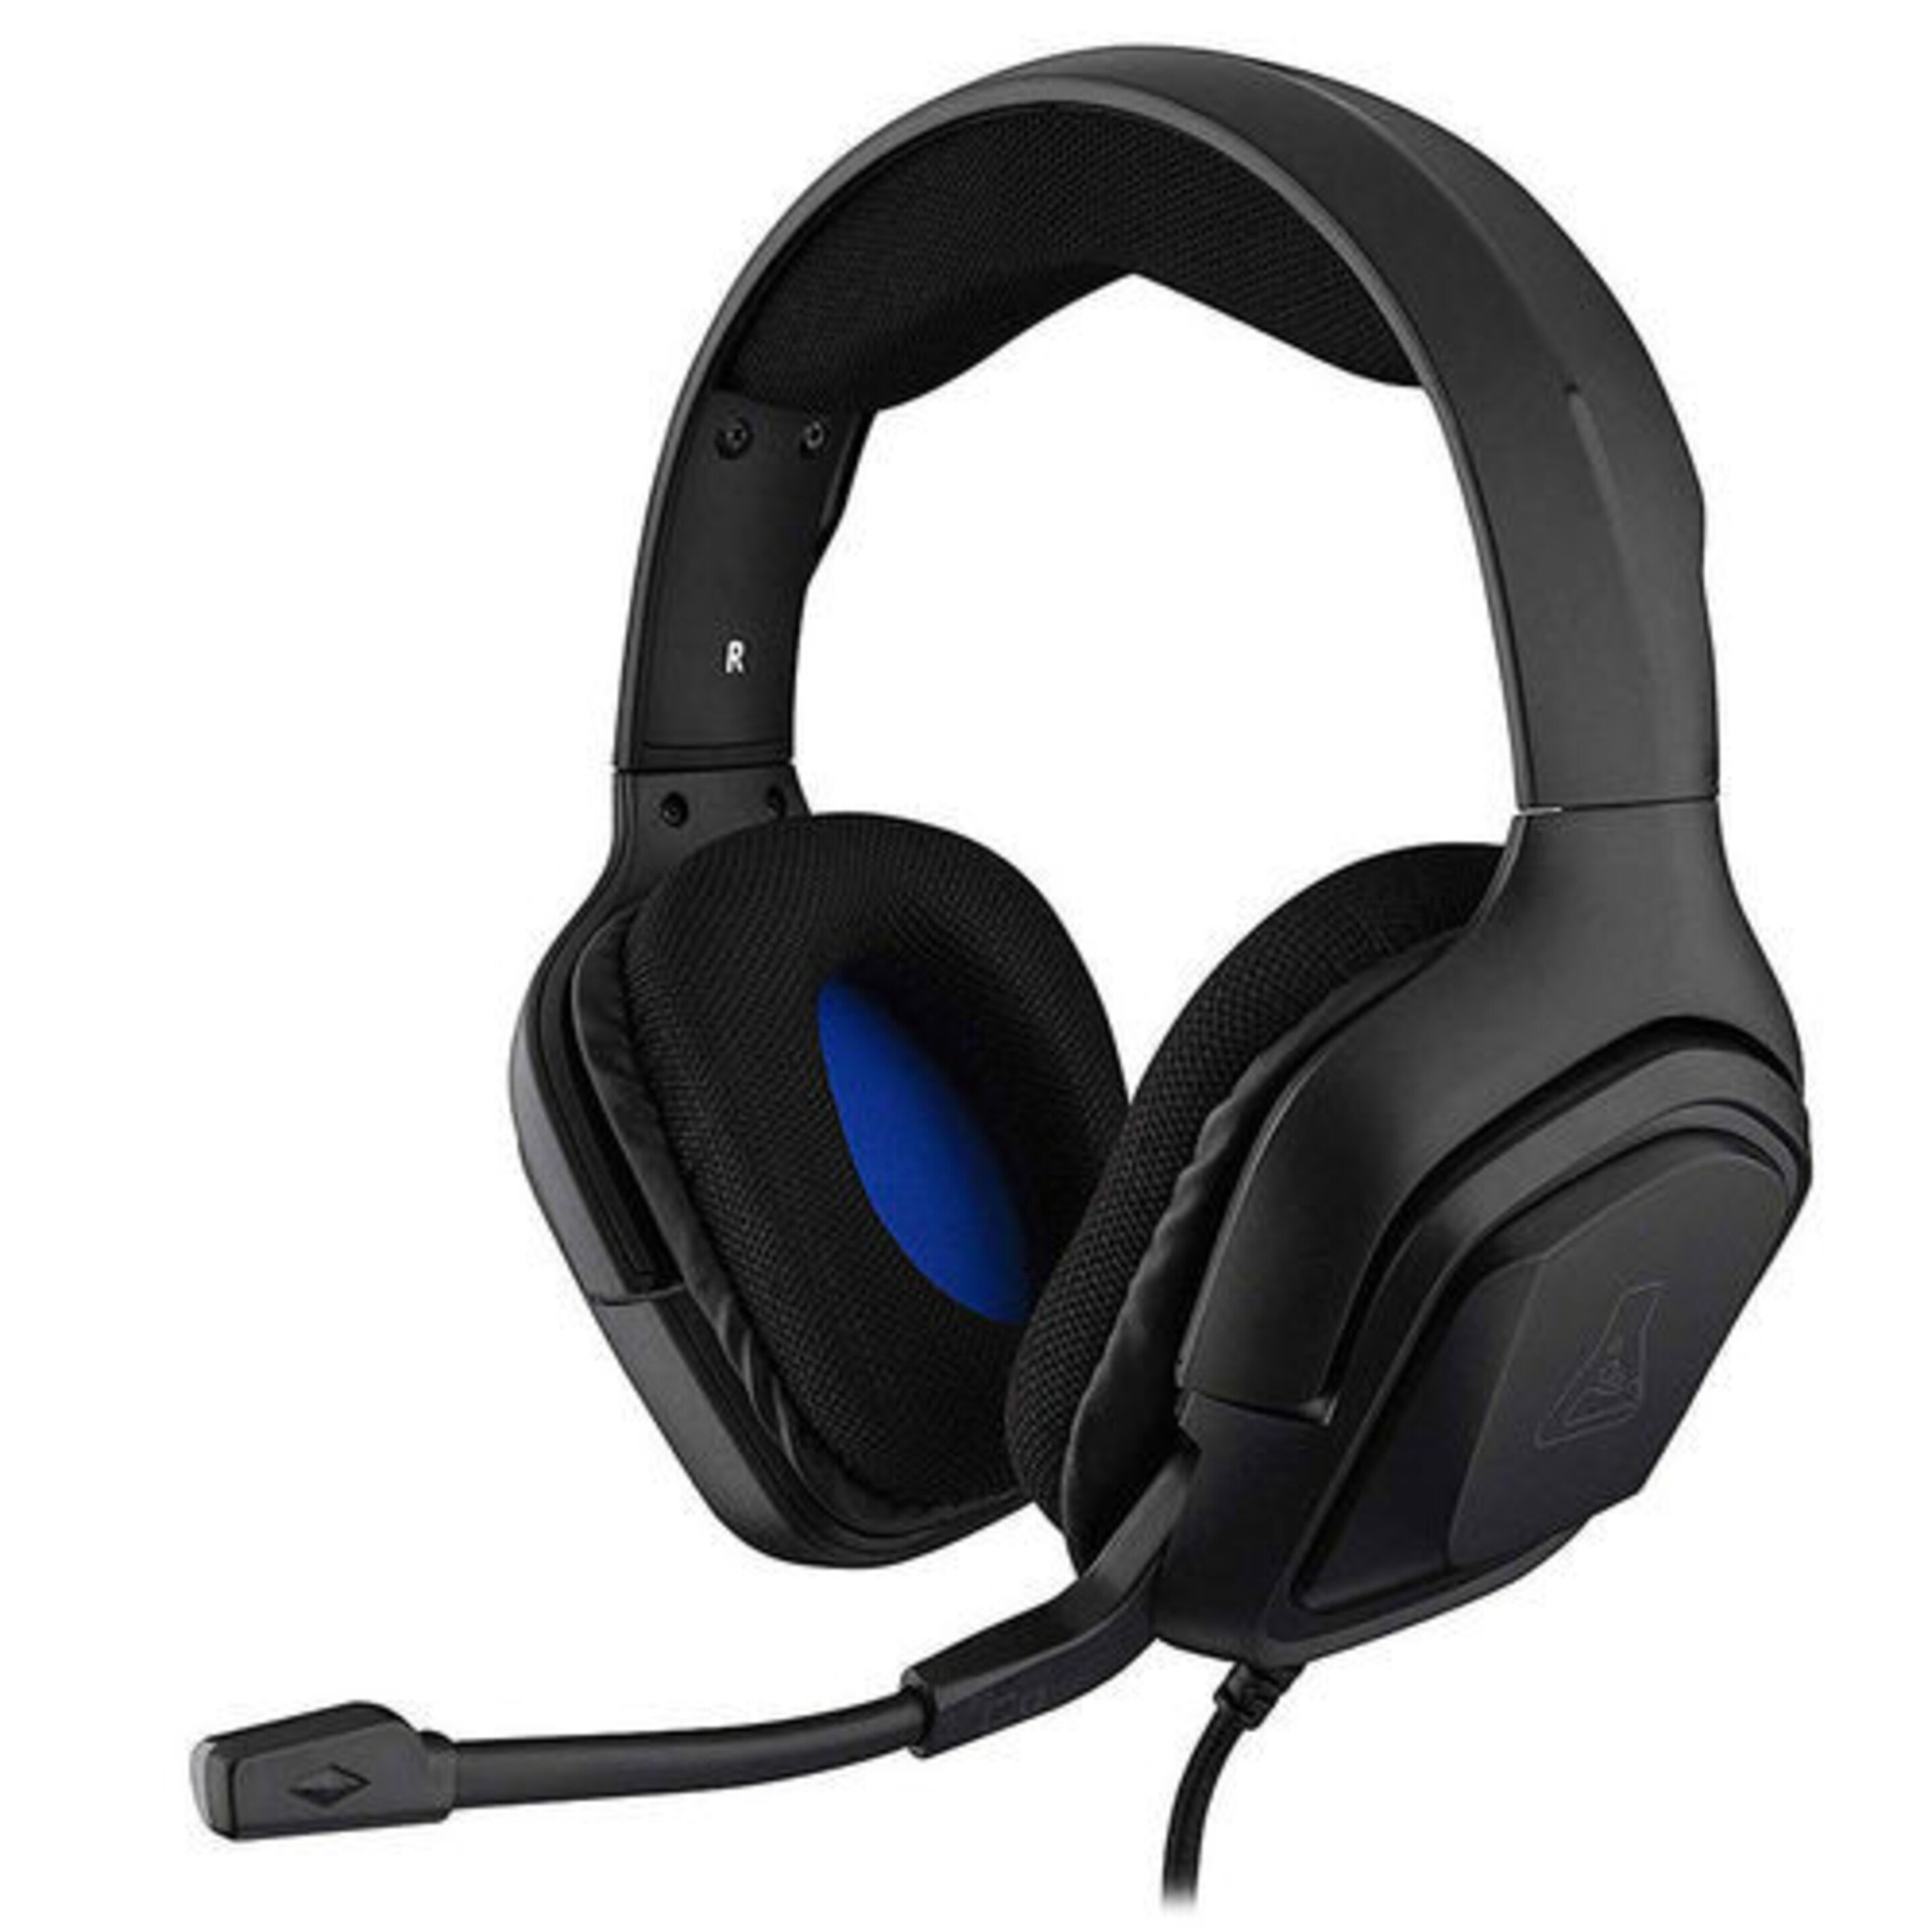 Auriculares C/microfono The G-lab Cobalt Gaming Negro